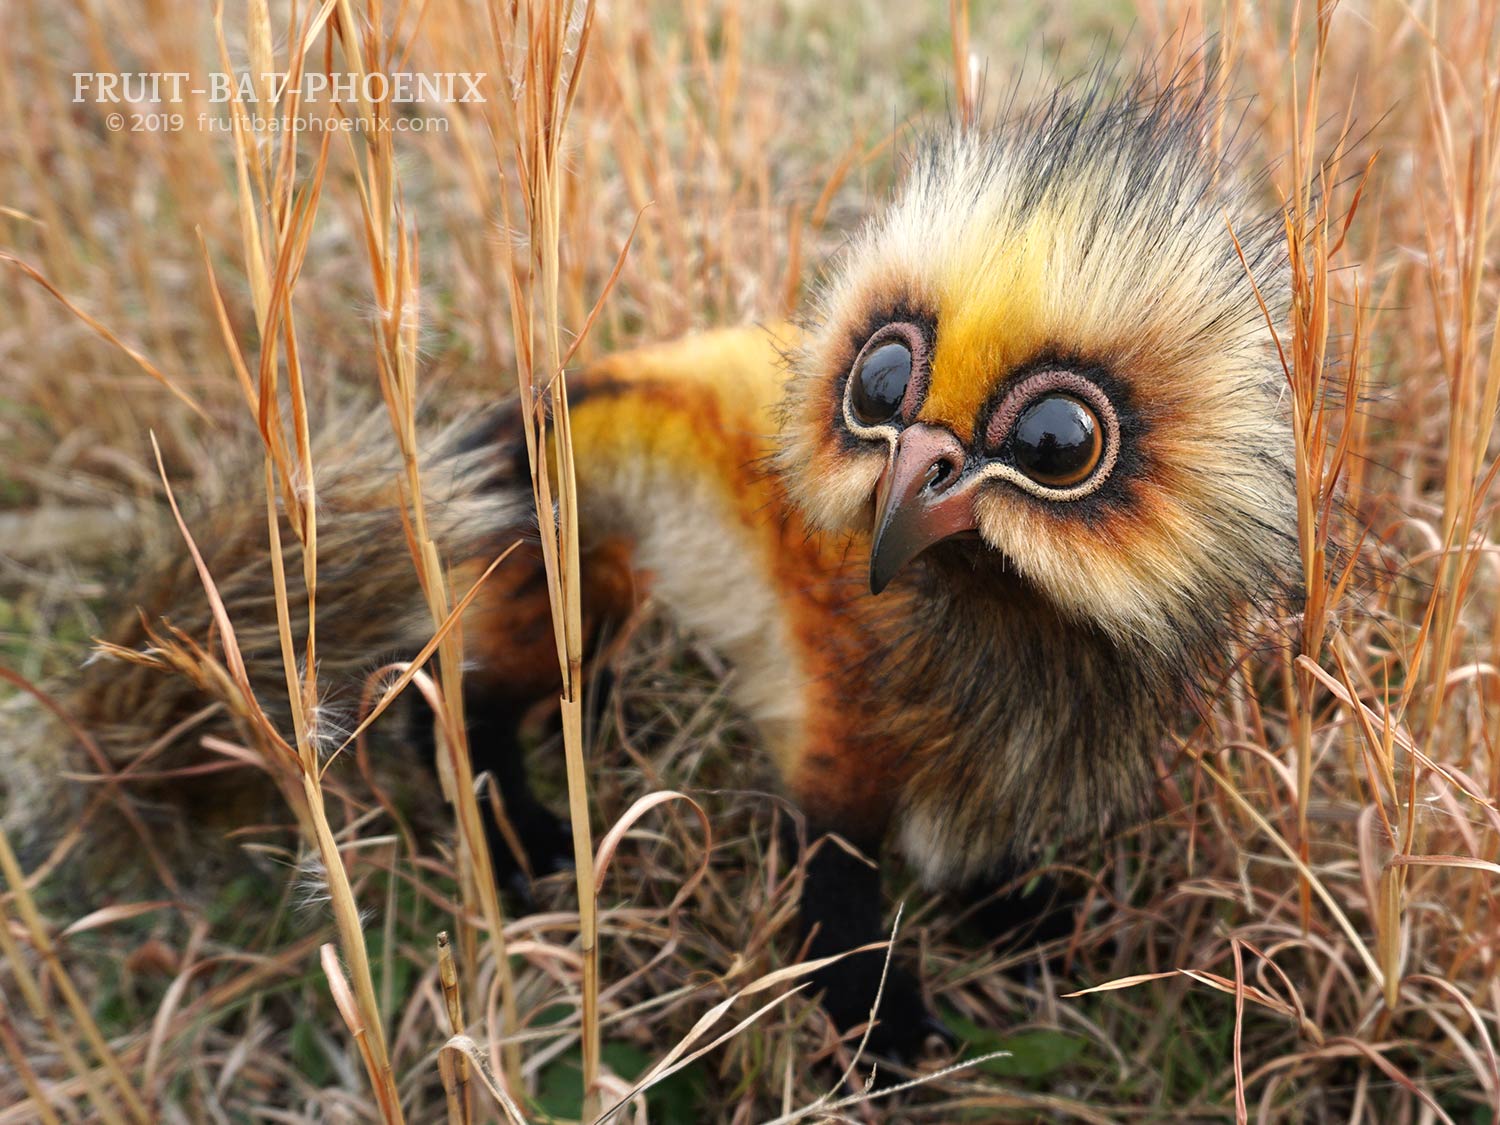 Ferrowl, a posable fantasy creature art doll, peers out from behind tall dry grass